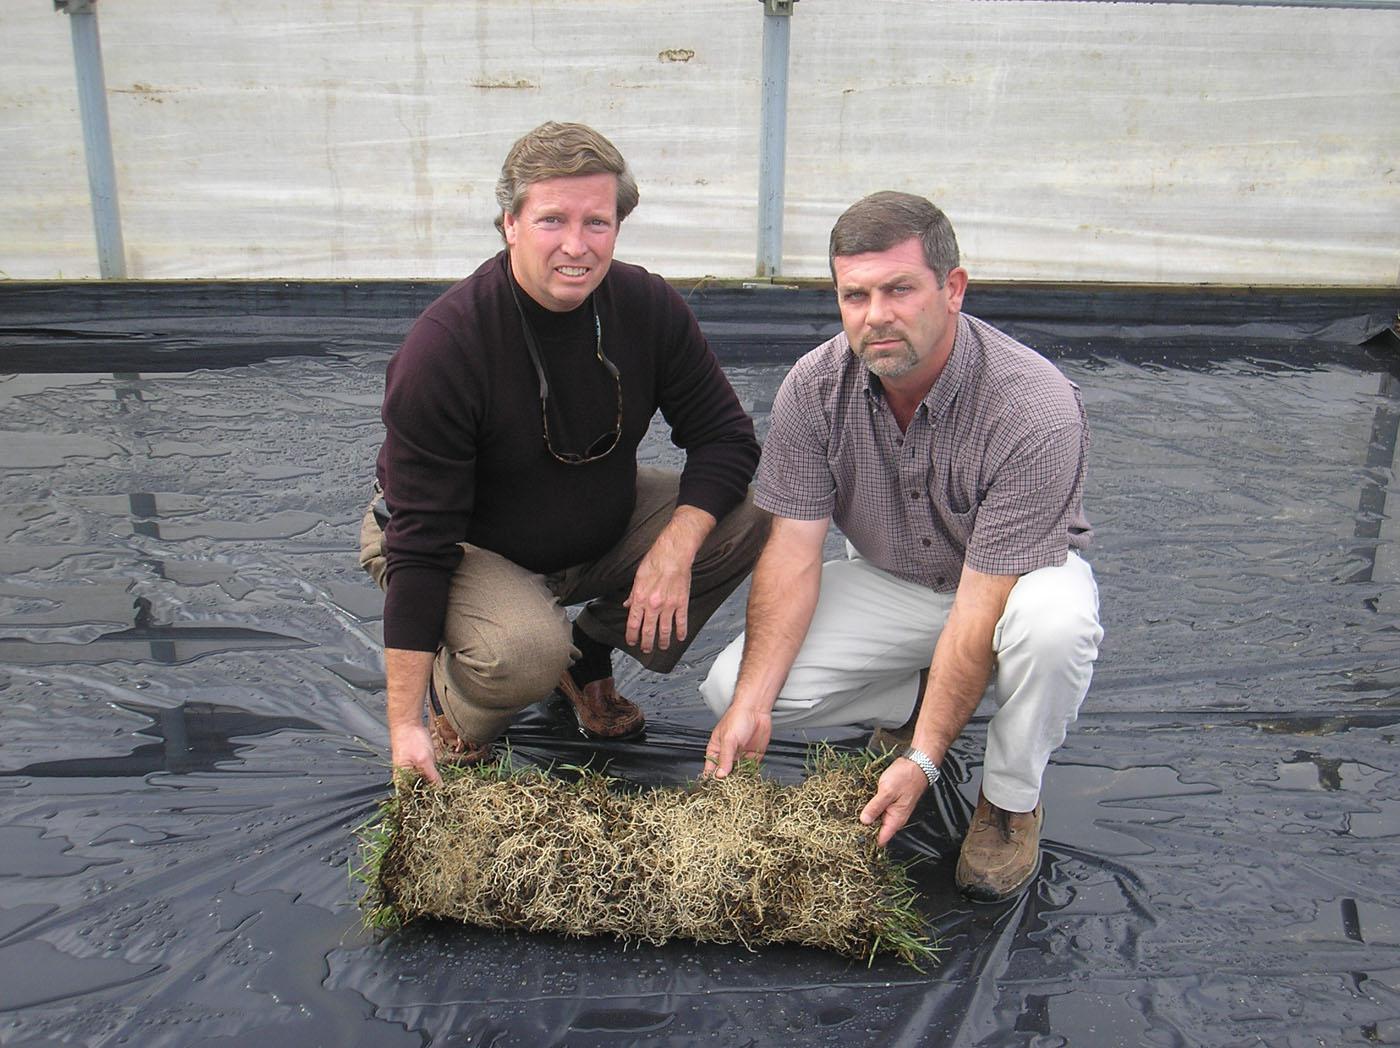 Phillip Jennings Turf Farm in Soperton, Ga., has acquired the rights to commercialize soilless sod produced with technology developed and patented by Mississippi State University. Phillip Jennings, left, the company's president and owner, and Mike Fulghum hold a completed section of soilless sod in a greenhouse ready to receive a new crop.